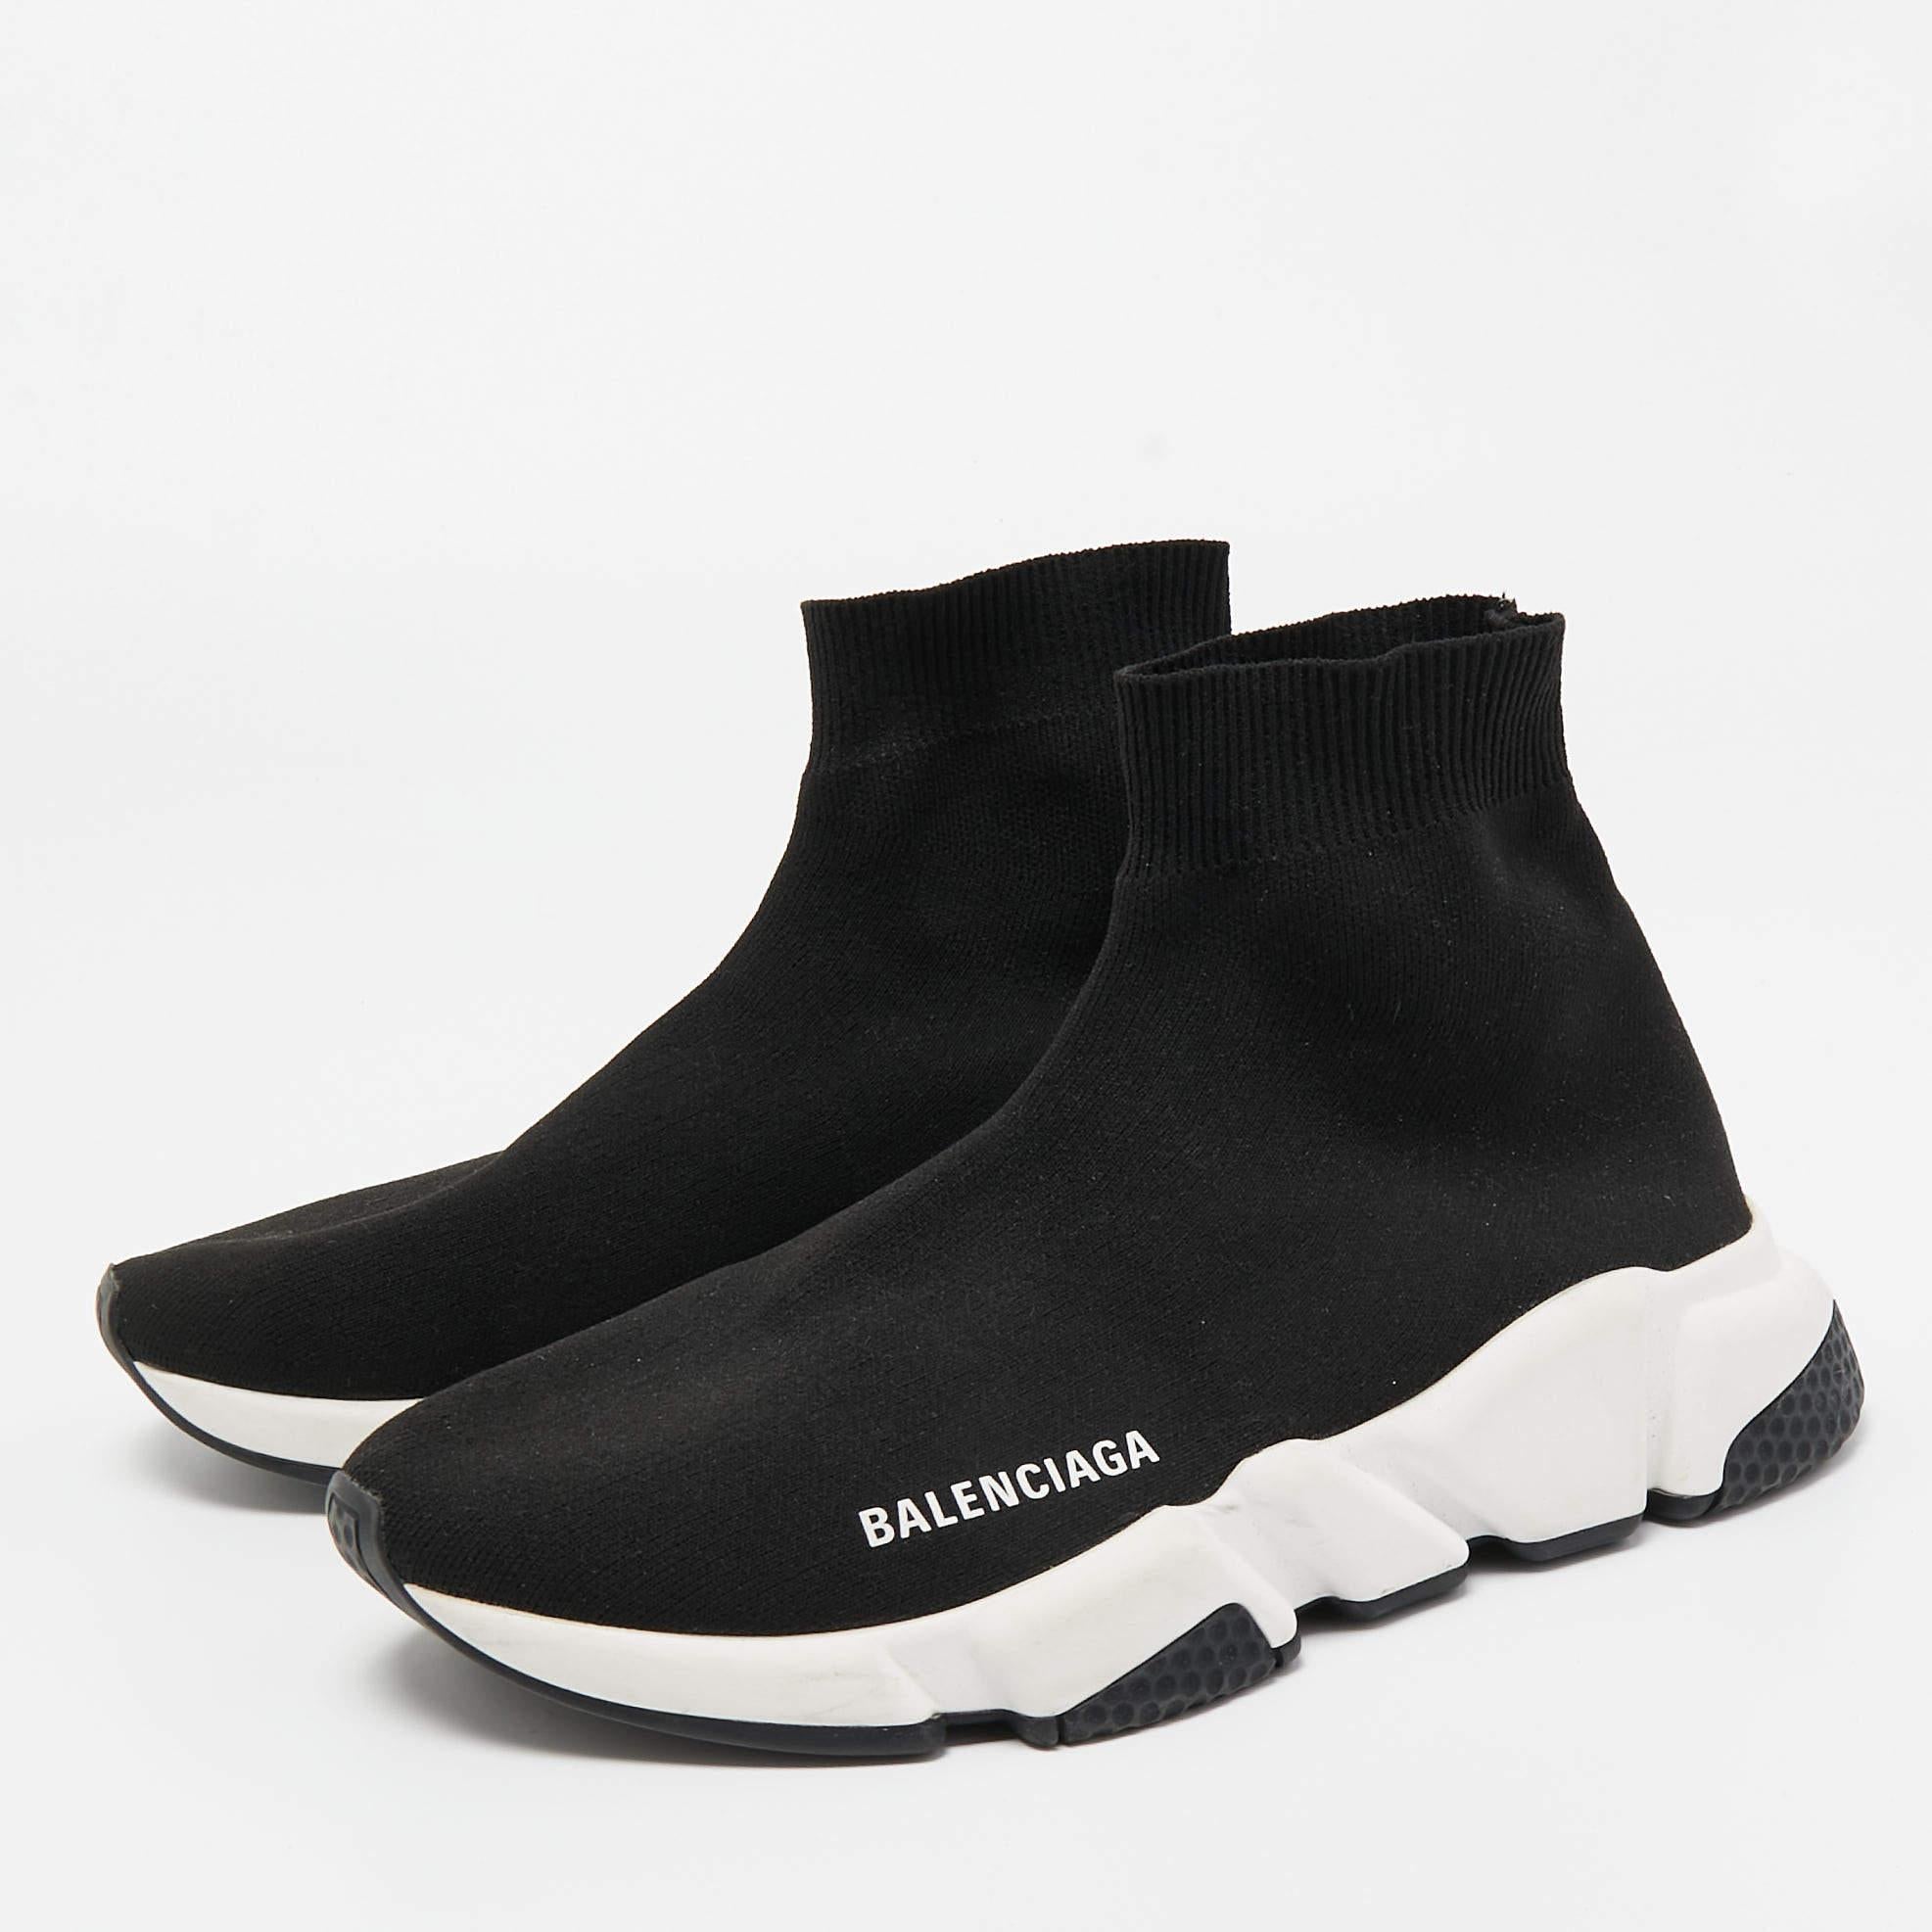 Elevate your footwear game with these Balenciaga black sneakers. Combining high-end aesthetics and unmatched comfort, these sneakers are a symbol of modern luxury and impeccable taste.

